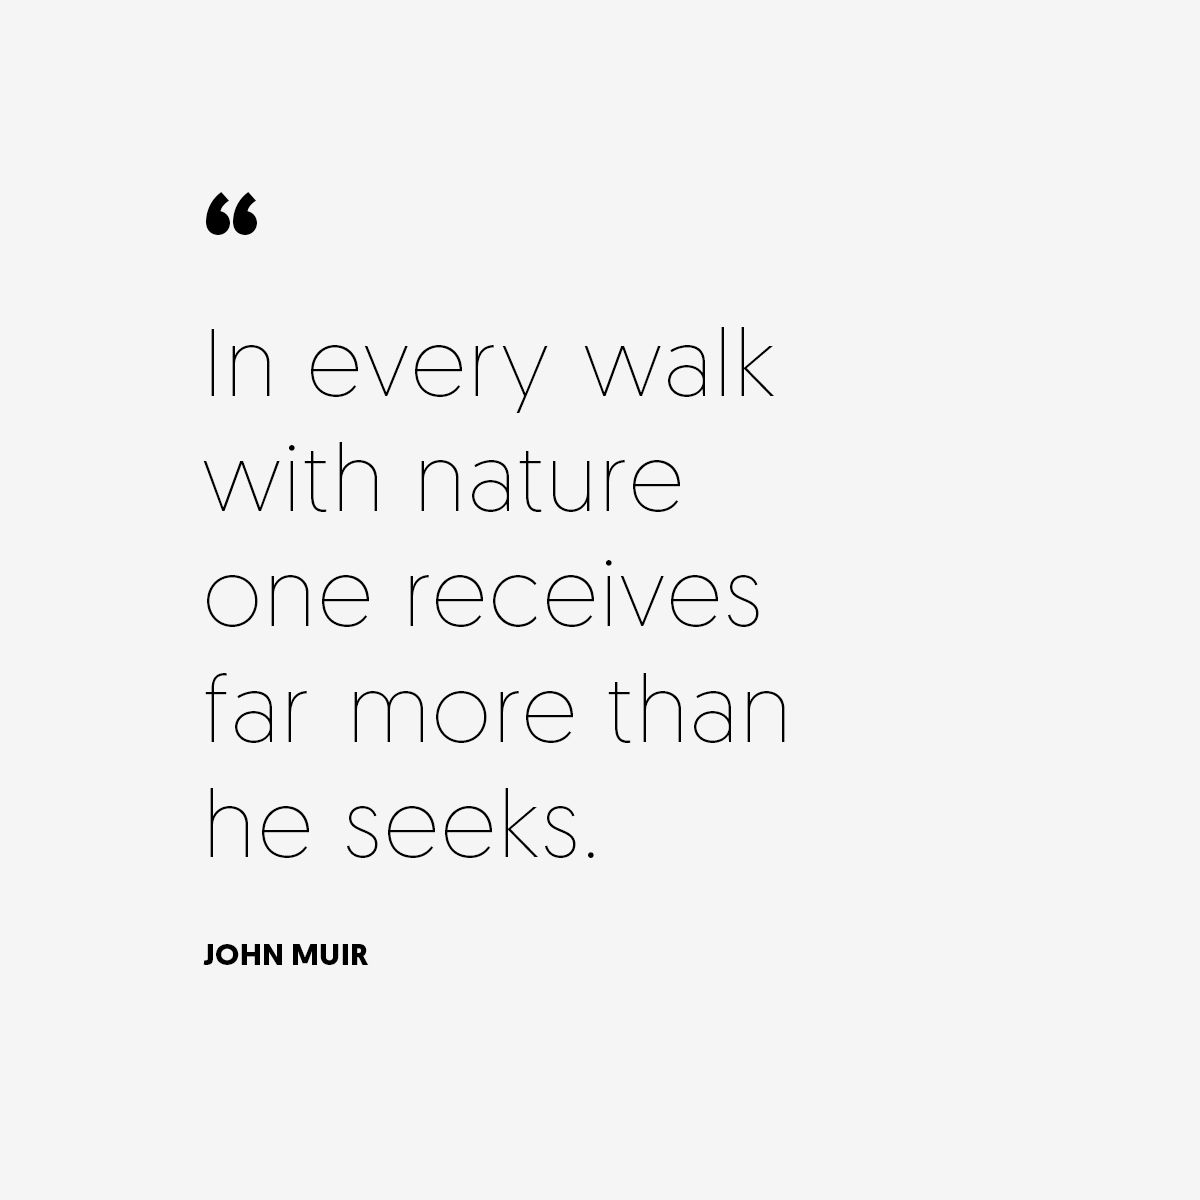 In every walk with nature one receives far more than he seeks. — John Muir